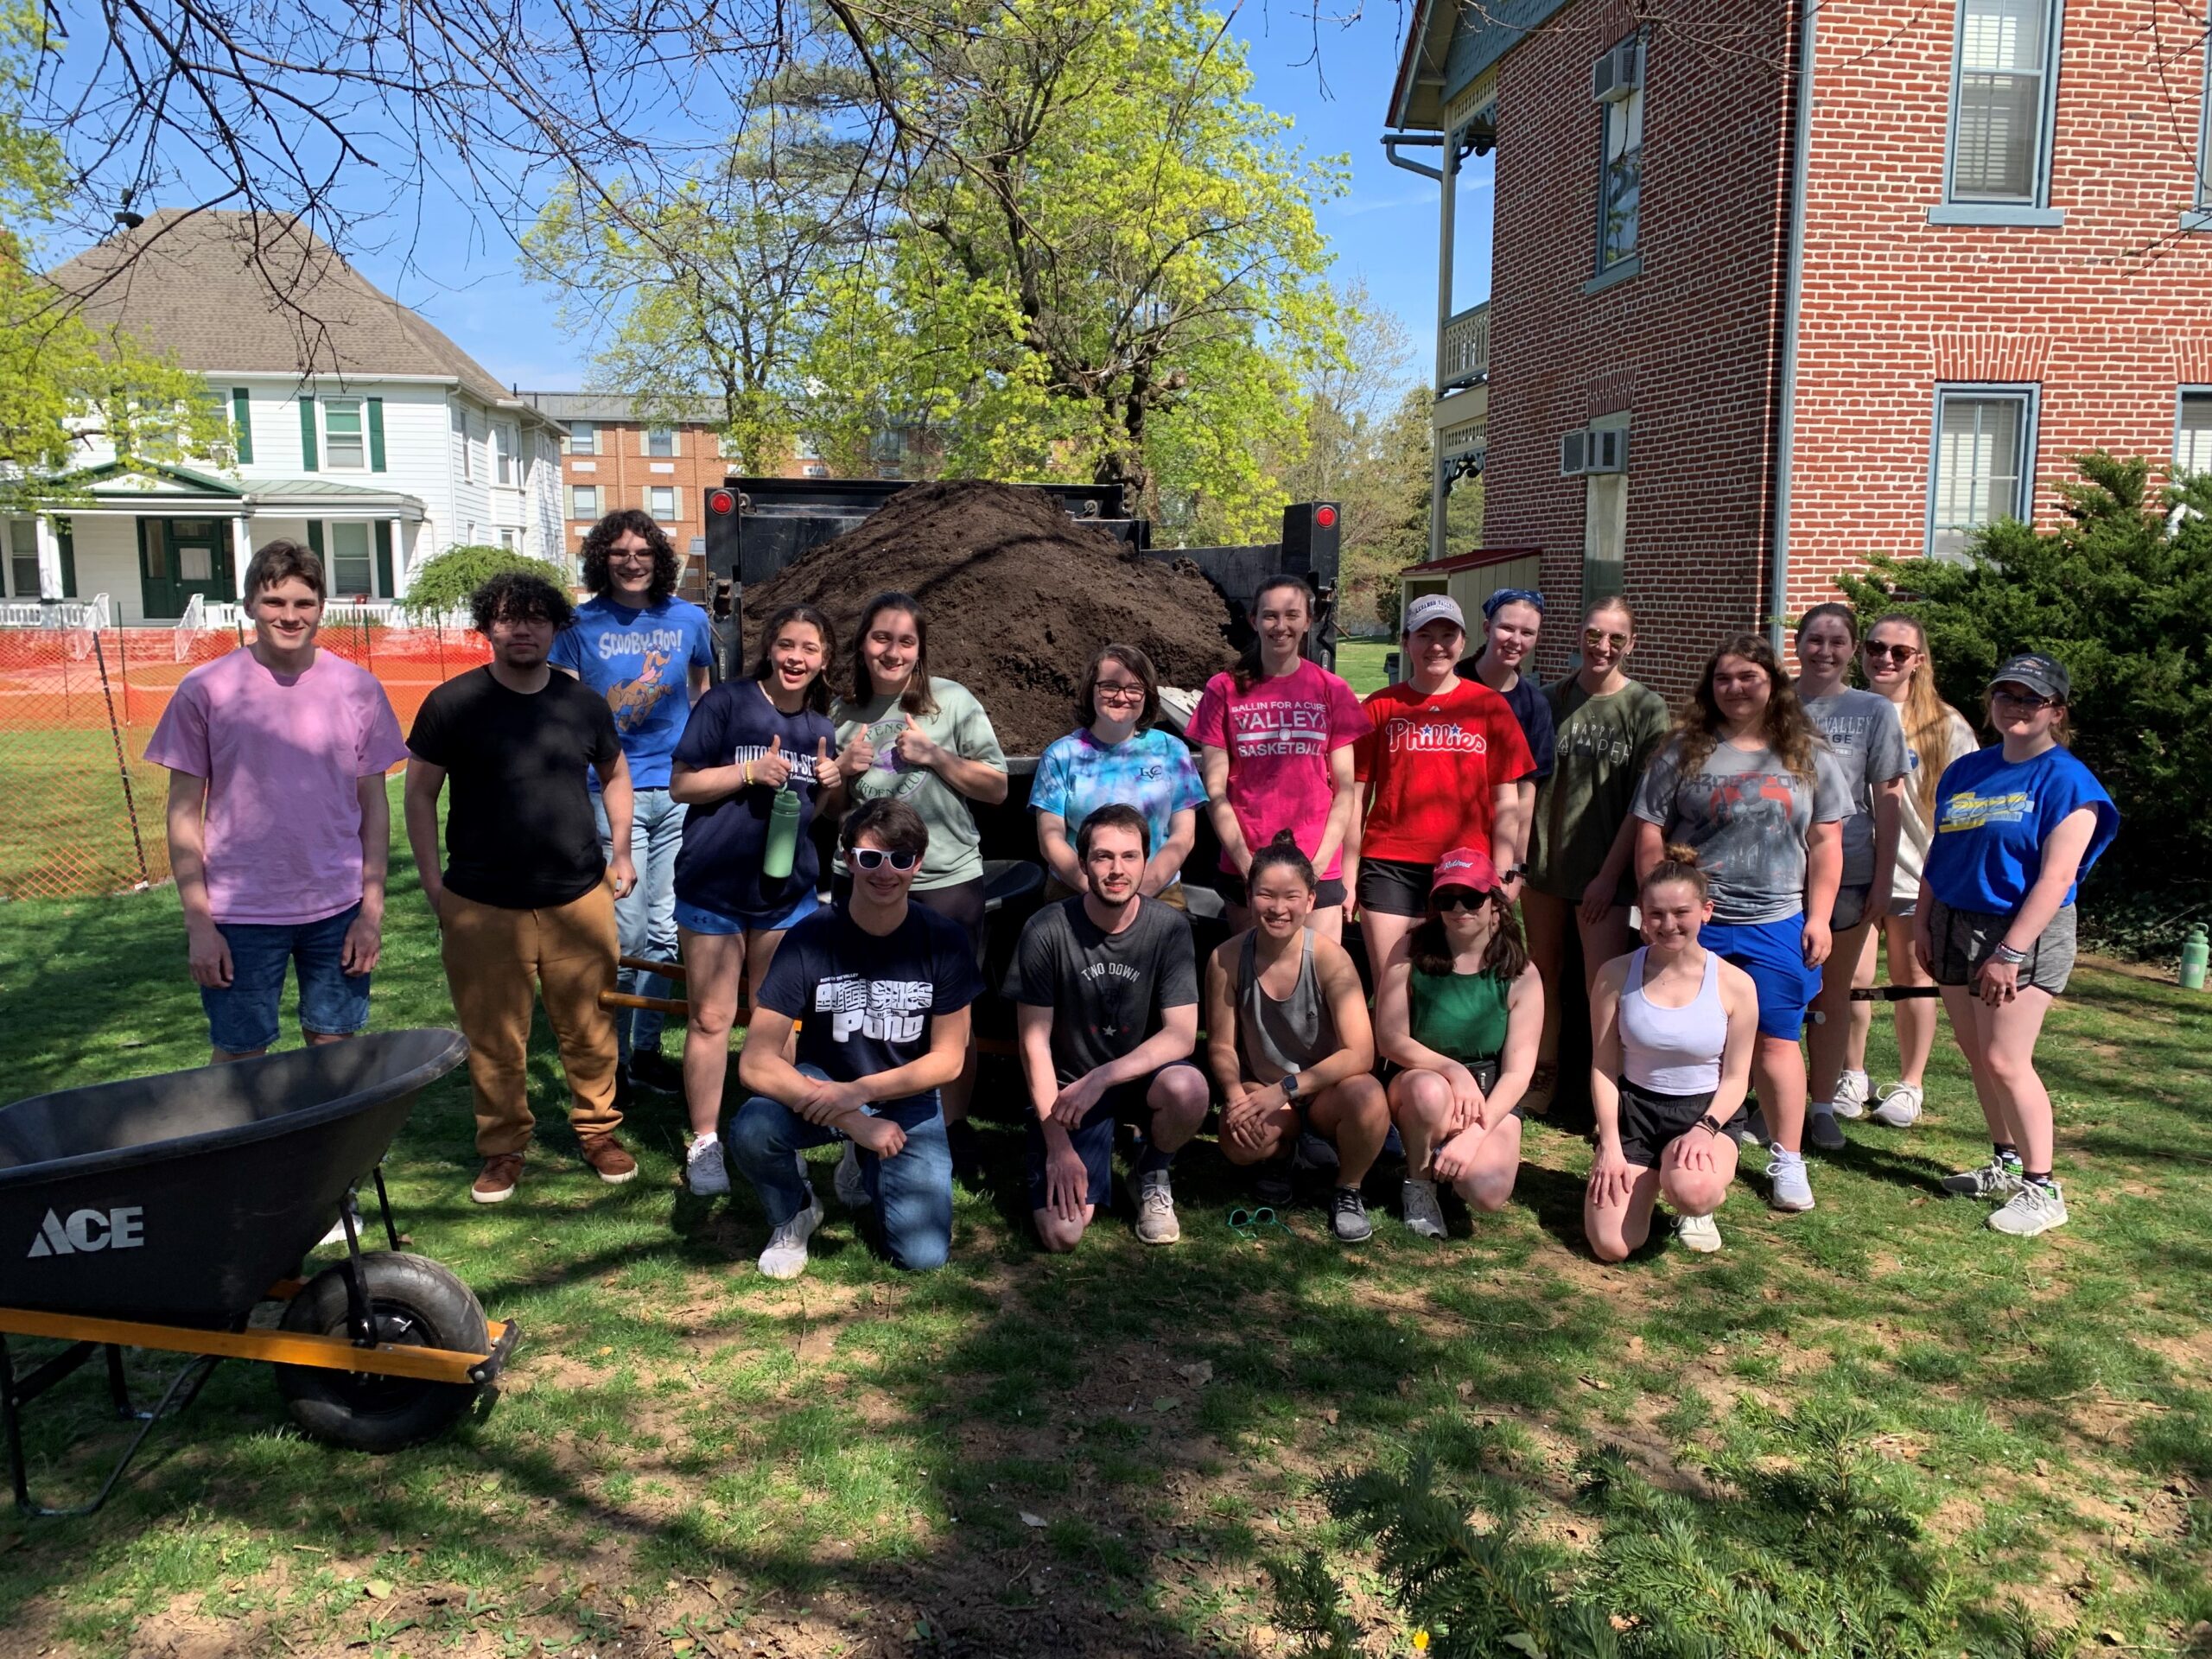 LVC students participate in campus clean up service project